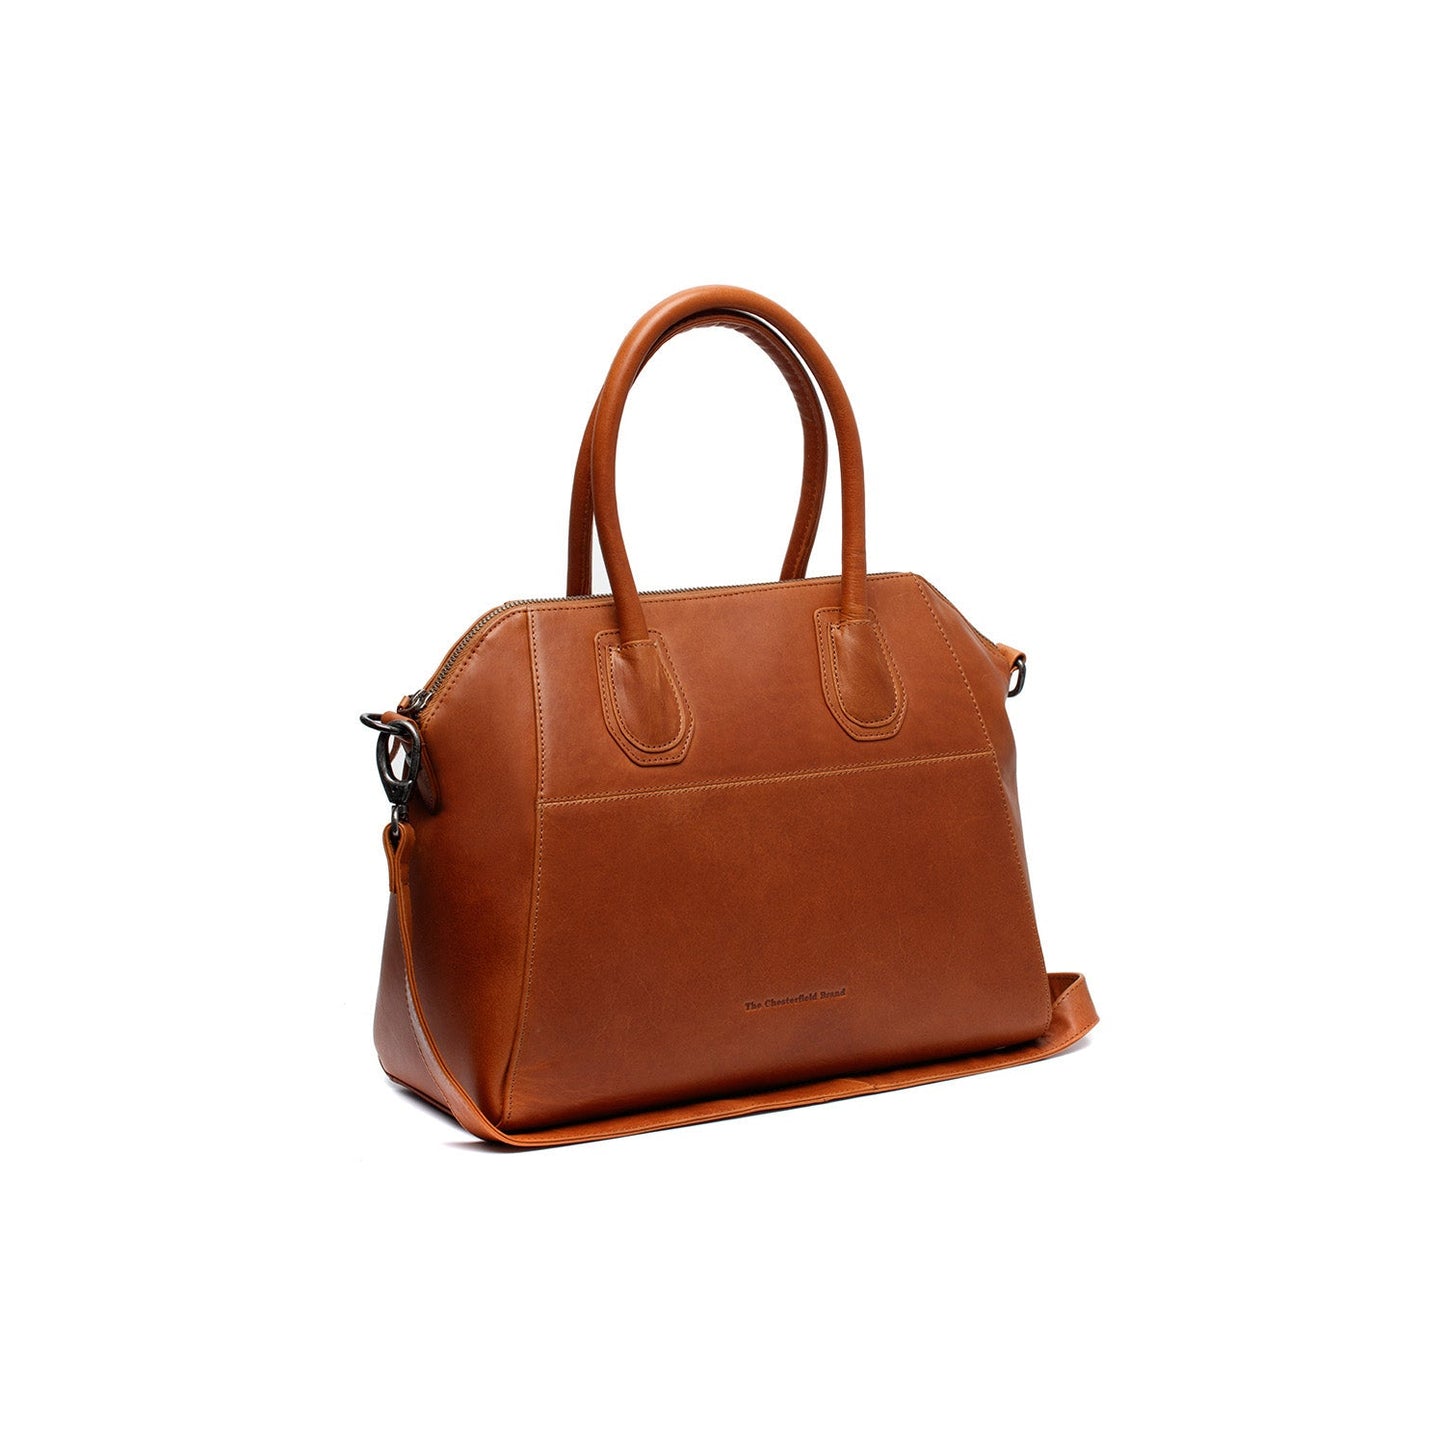 Schultertasche Marsala C48.1331 von The Chesterfield Brand - Laure Bags and Travel